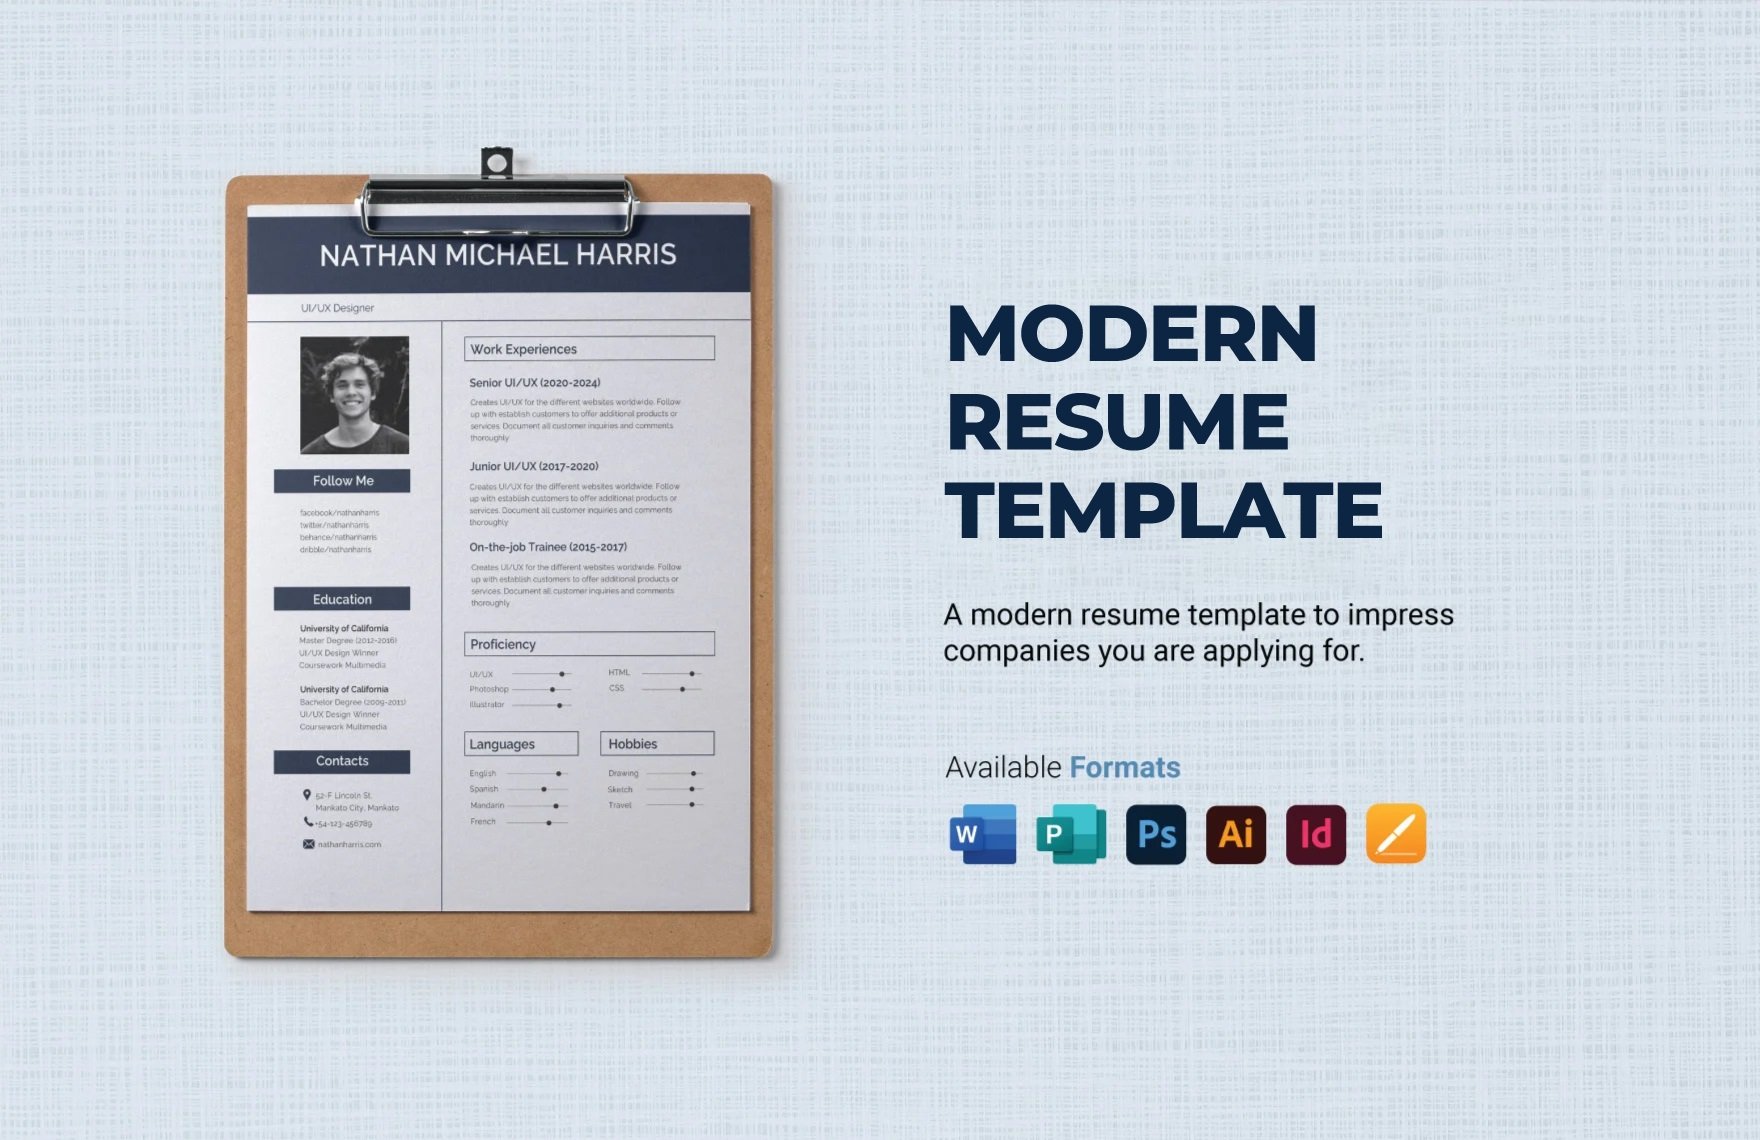 Free Modern Resume in Word, PDF, Illustrator, PSD, Apple Pages, Publisher, InDesign